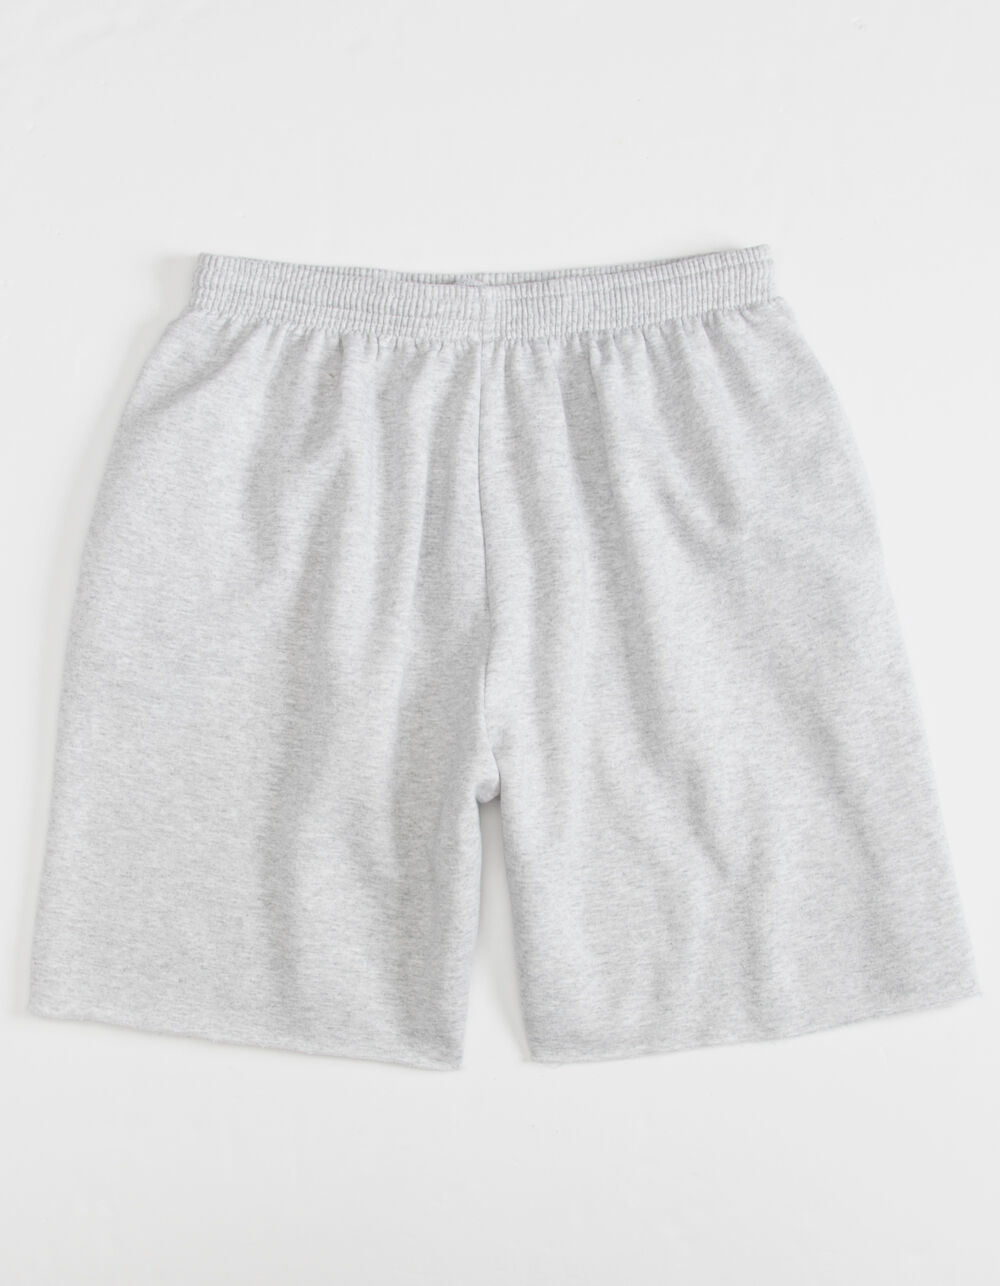 BDG Urban Outfitters Mens Jogger Sweat Shorts - HEATHER GRAY | Tillys